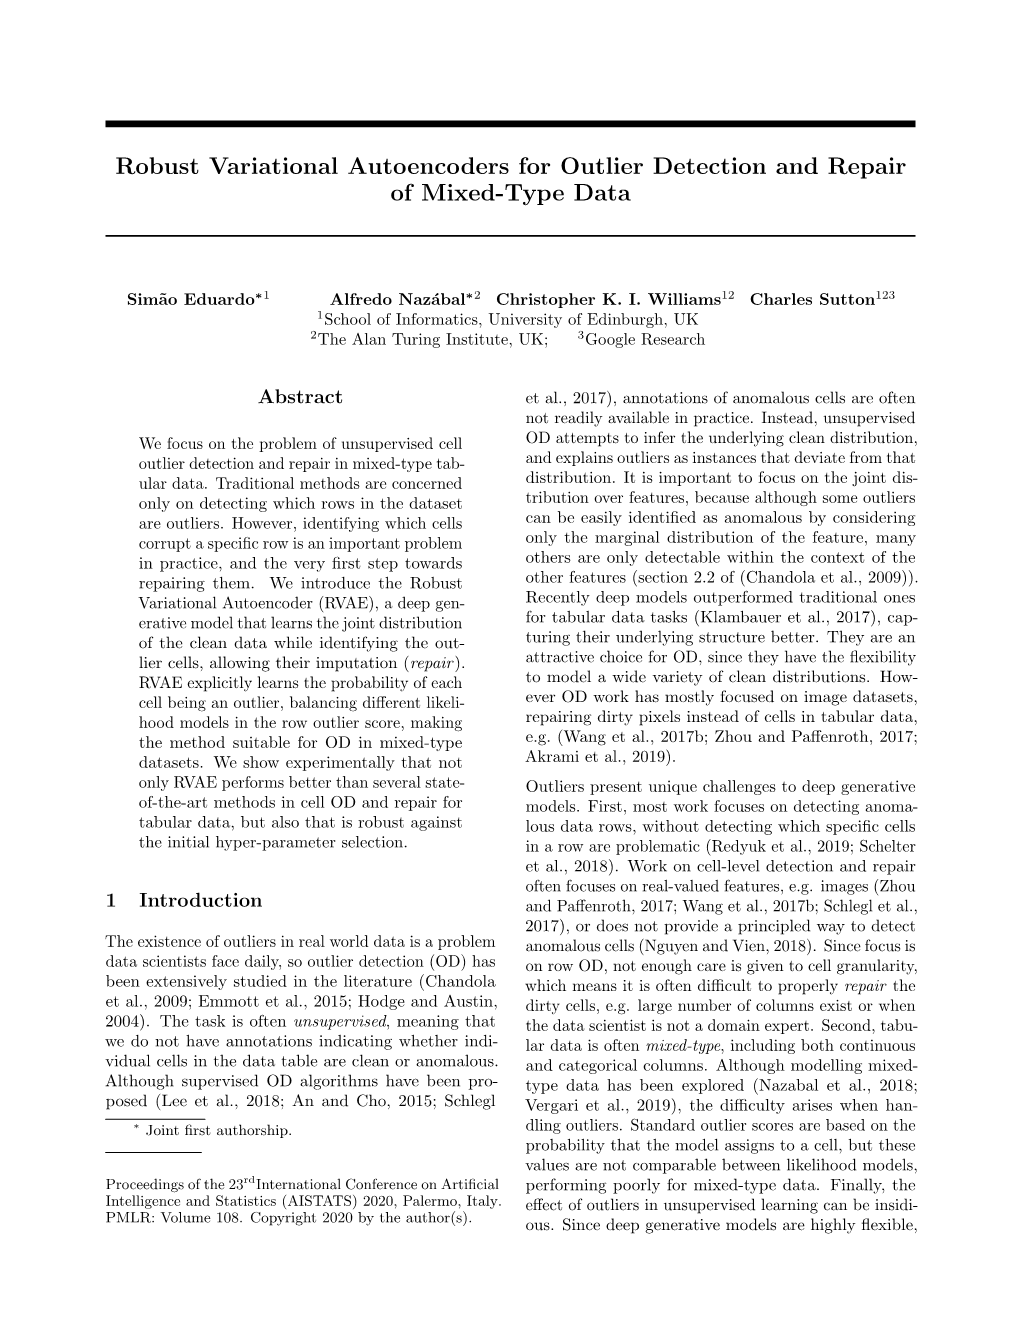 Robust Variational Autoencoders for Outlier Detection and Repair of Mixed-Type Data